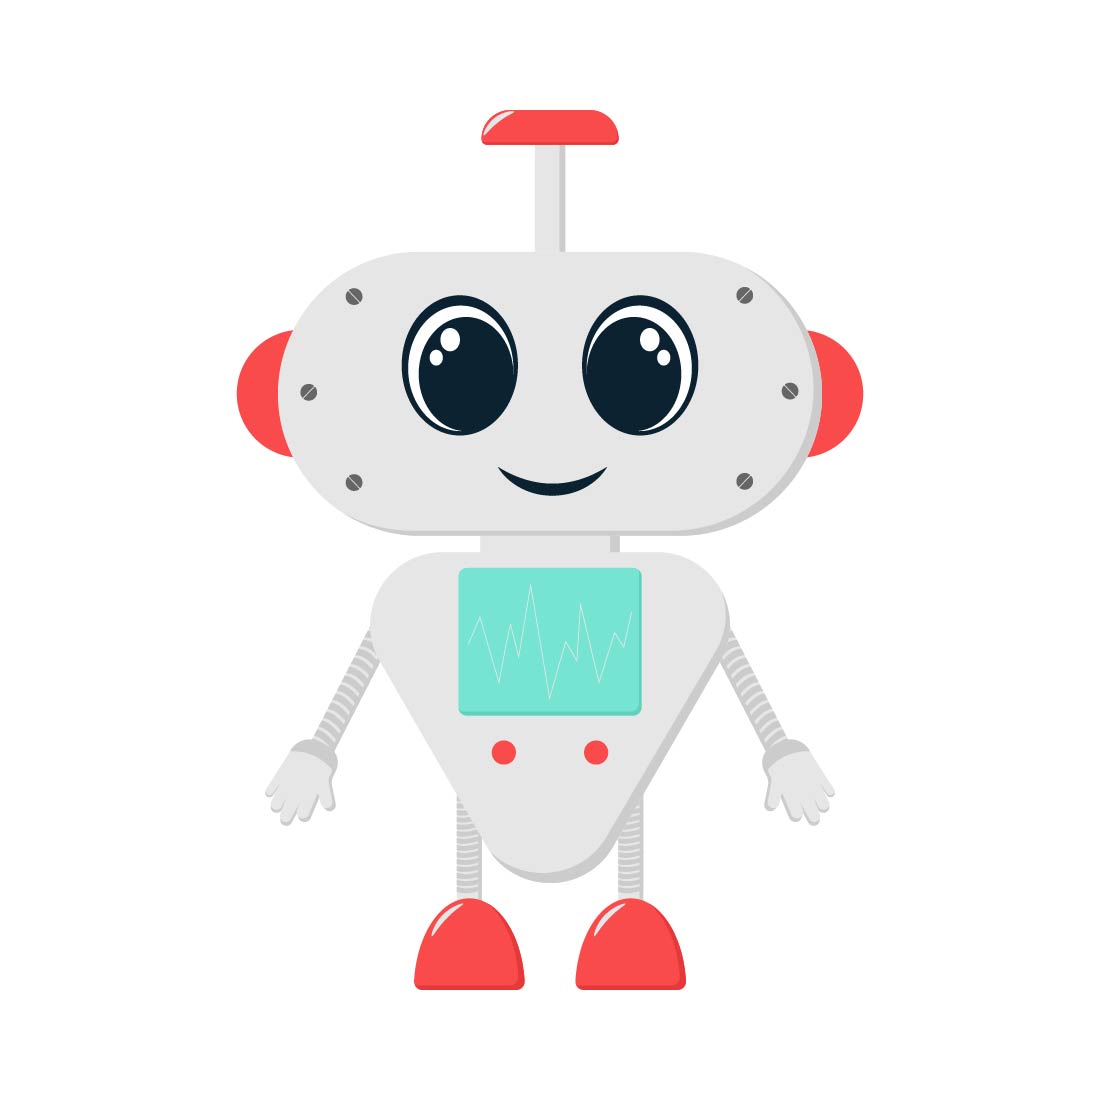 Illustrations and stickers with cute robots with big eyes preview image.